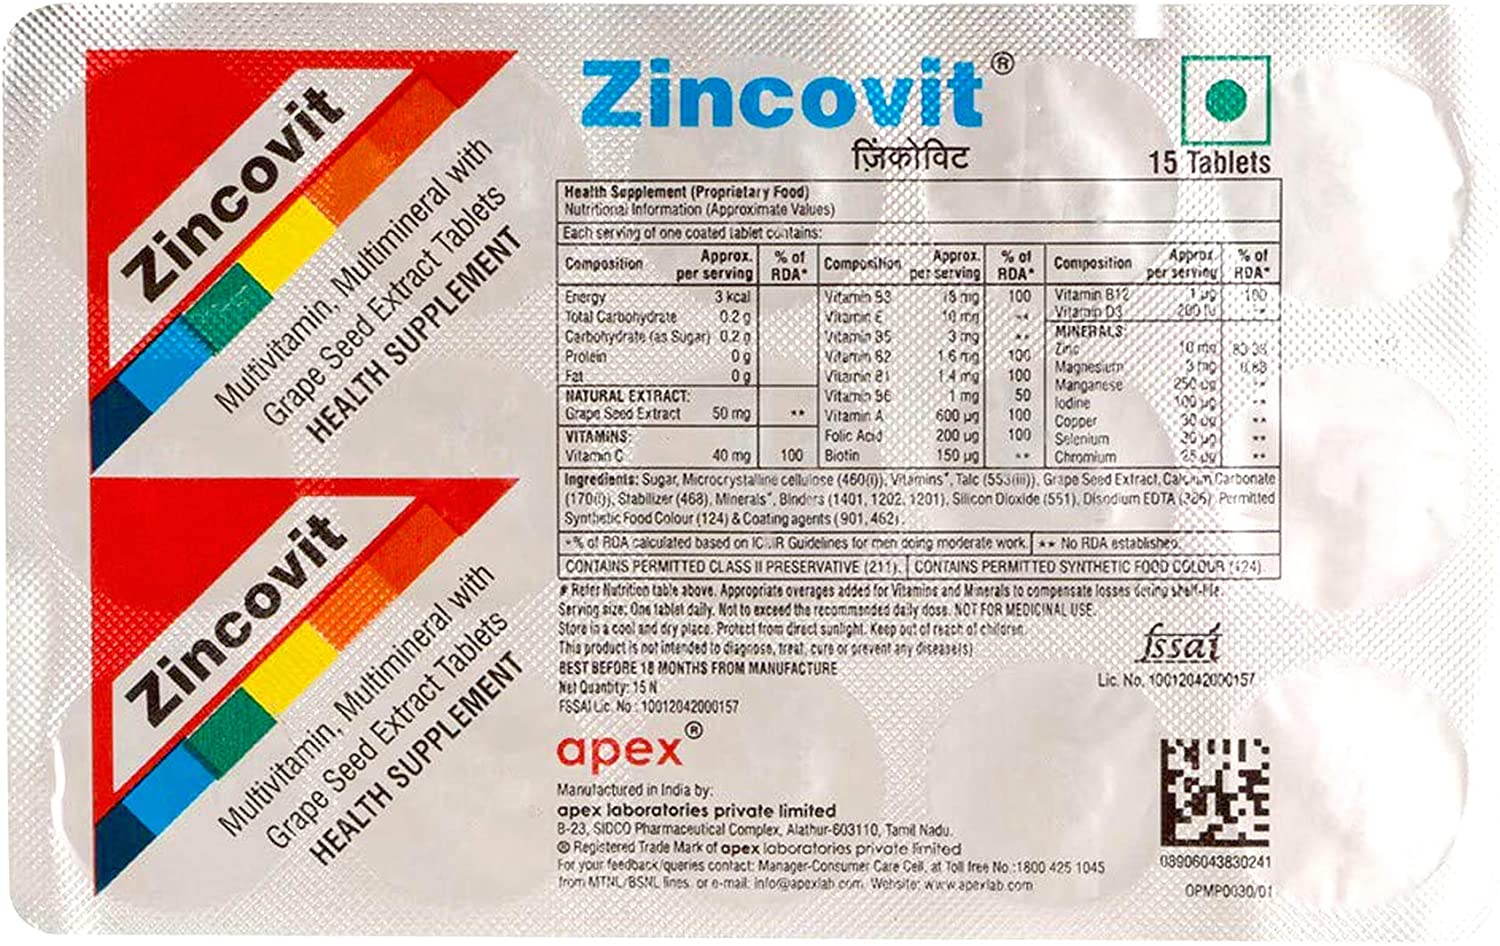 Ingredients of Zincovit table